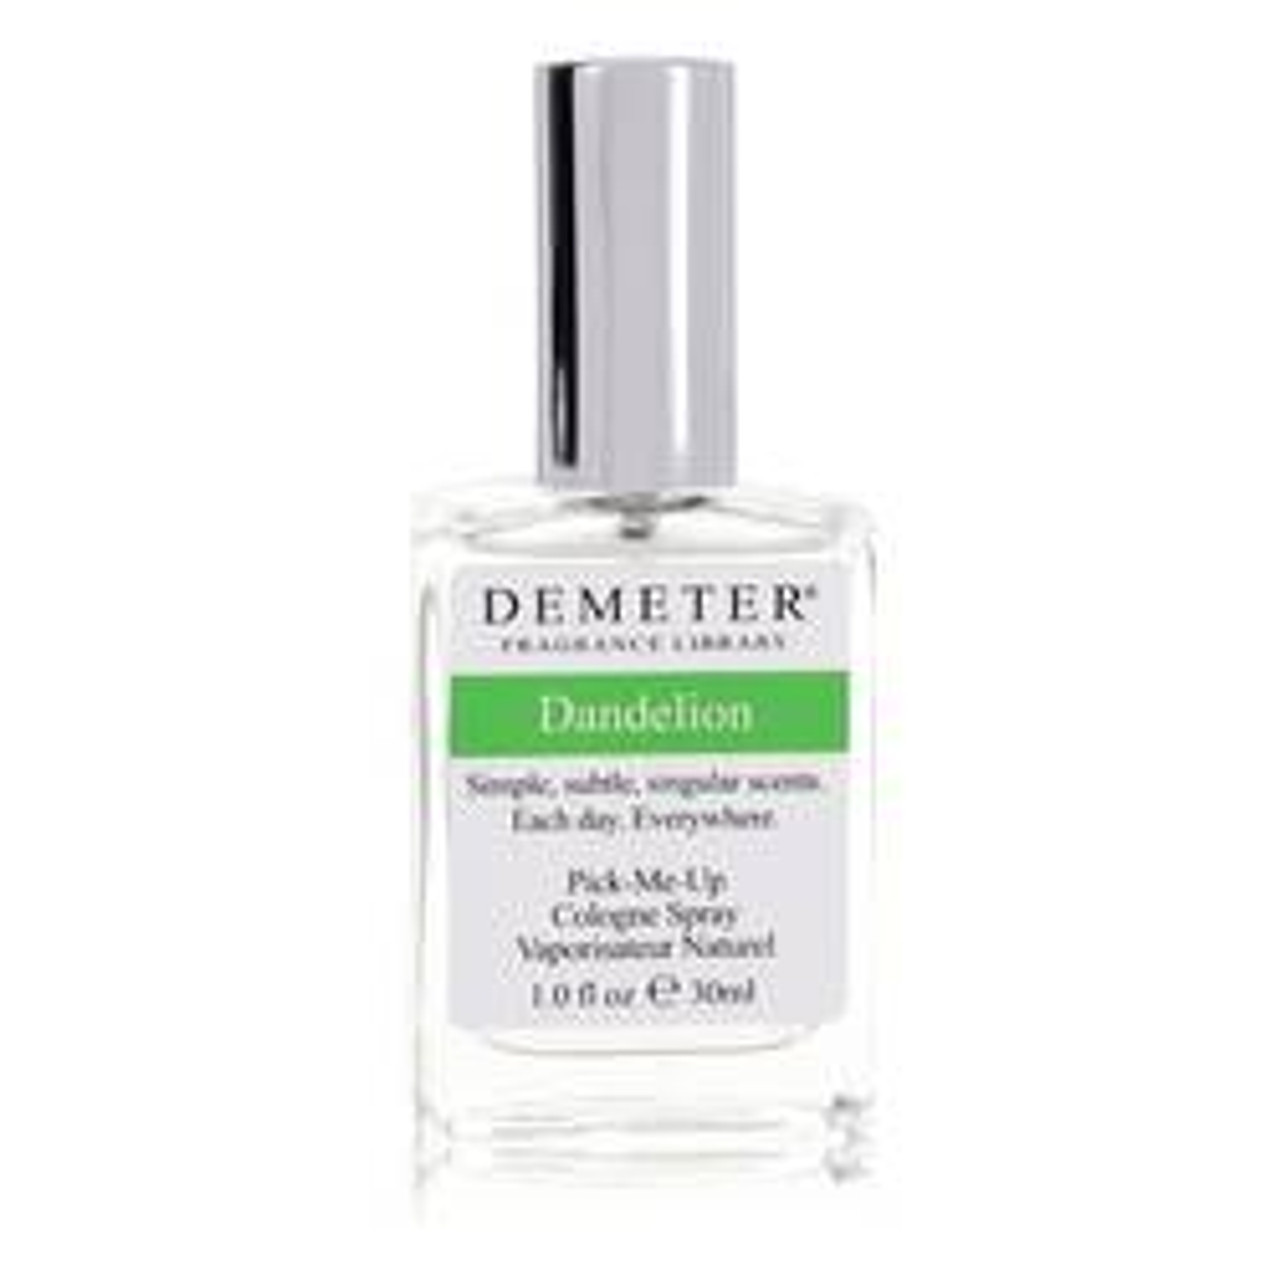 Demeter Dandelion Perfume By Demeter Cologne Spray (unboxed) 1 oz for Women - [From 55.00 - Choose pk Qty ] - *Ships from Miami